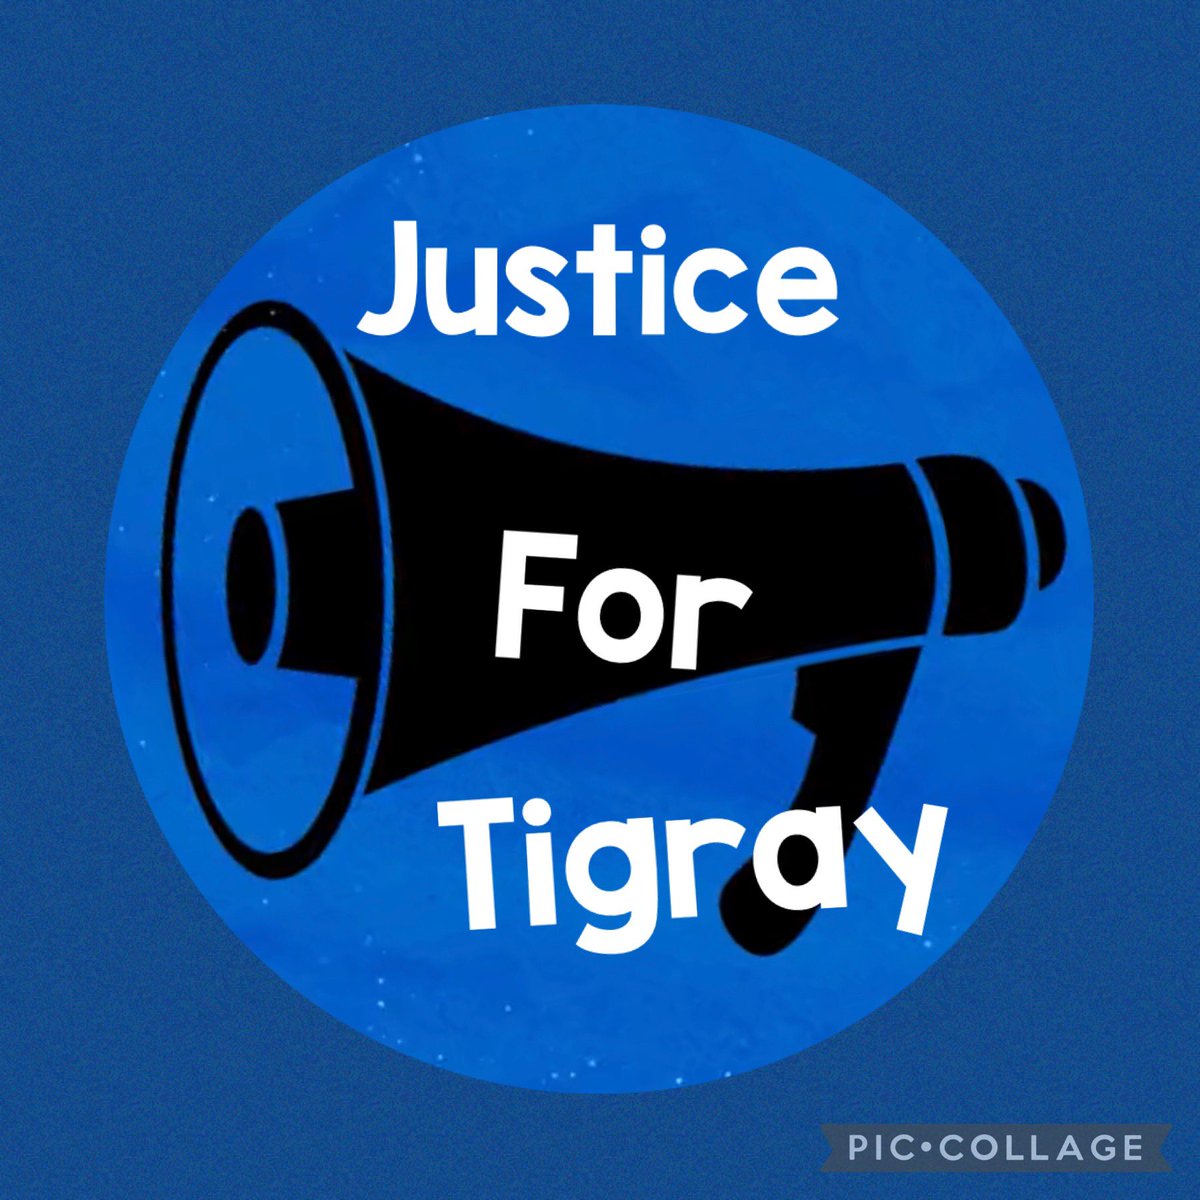 The IC must understand how the dictator of 🇪🇷 is always against peace. Can you imagine such kind of dictator, butcher, & looter being your neighbour? #Tigray, the country with civilised & indigenous ppl & historical places, is suffering because of him. #TigrayGenocide #UN #AU #EU